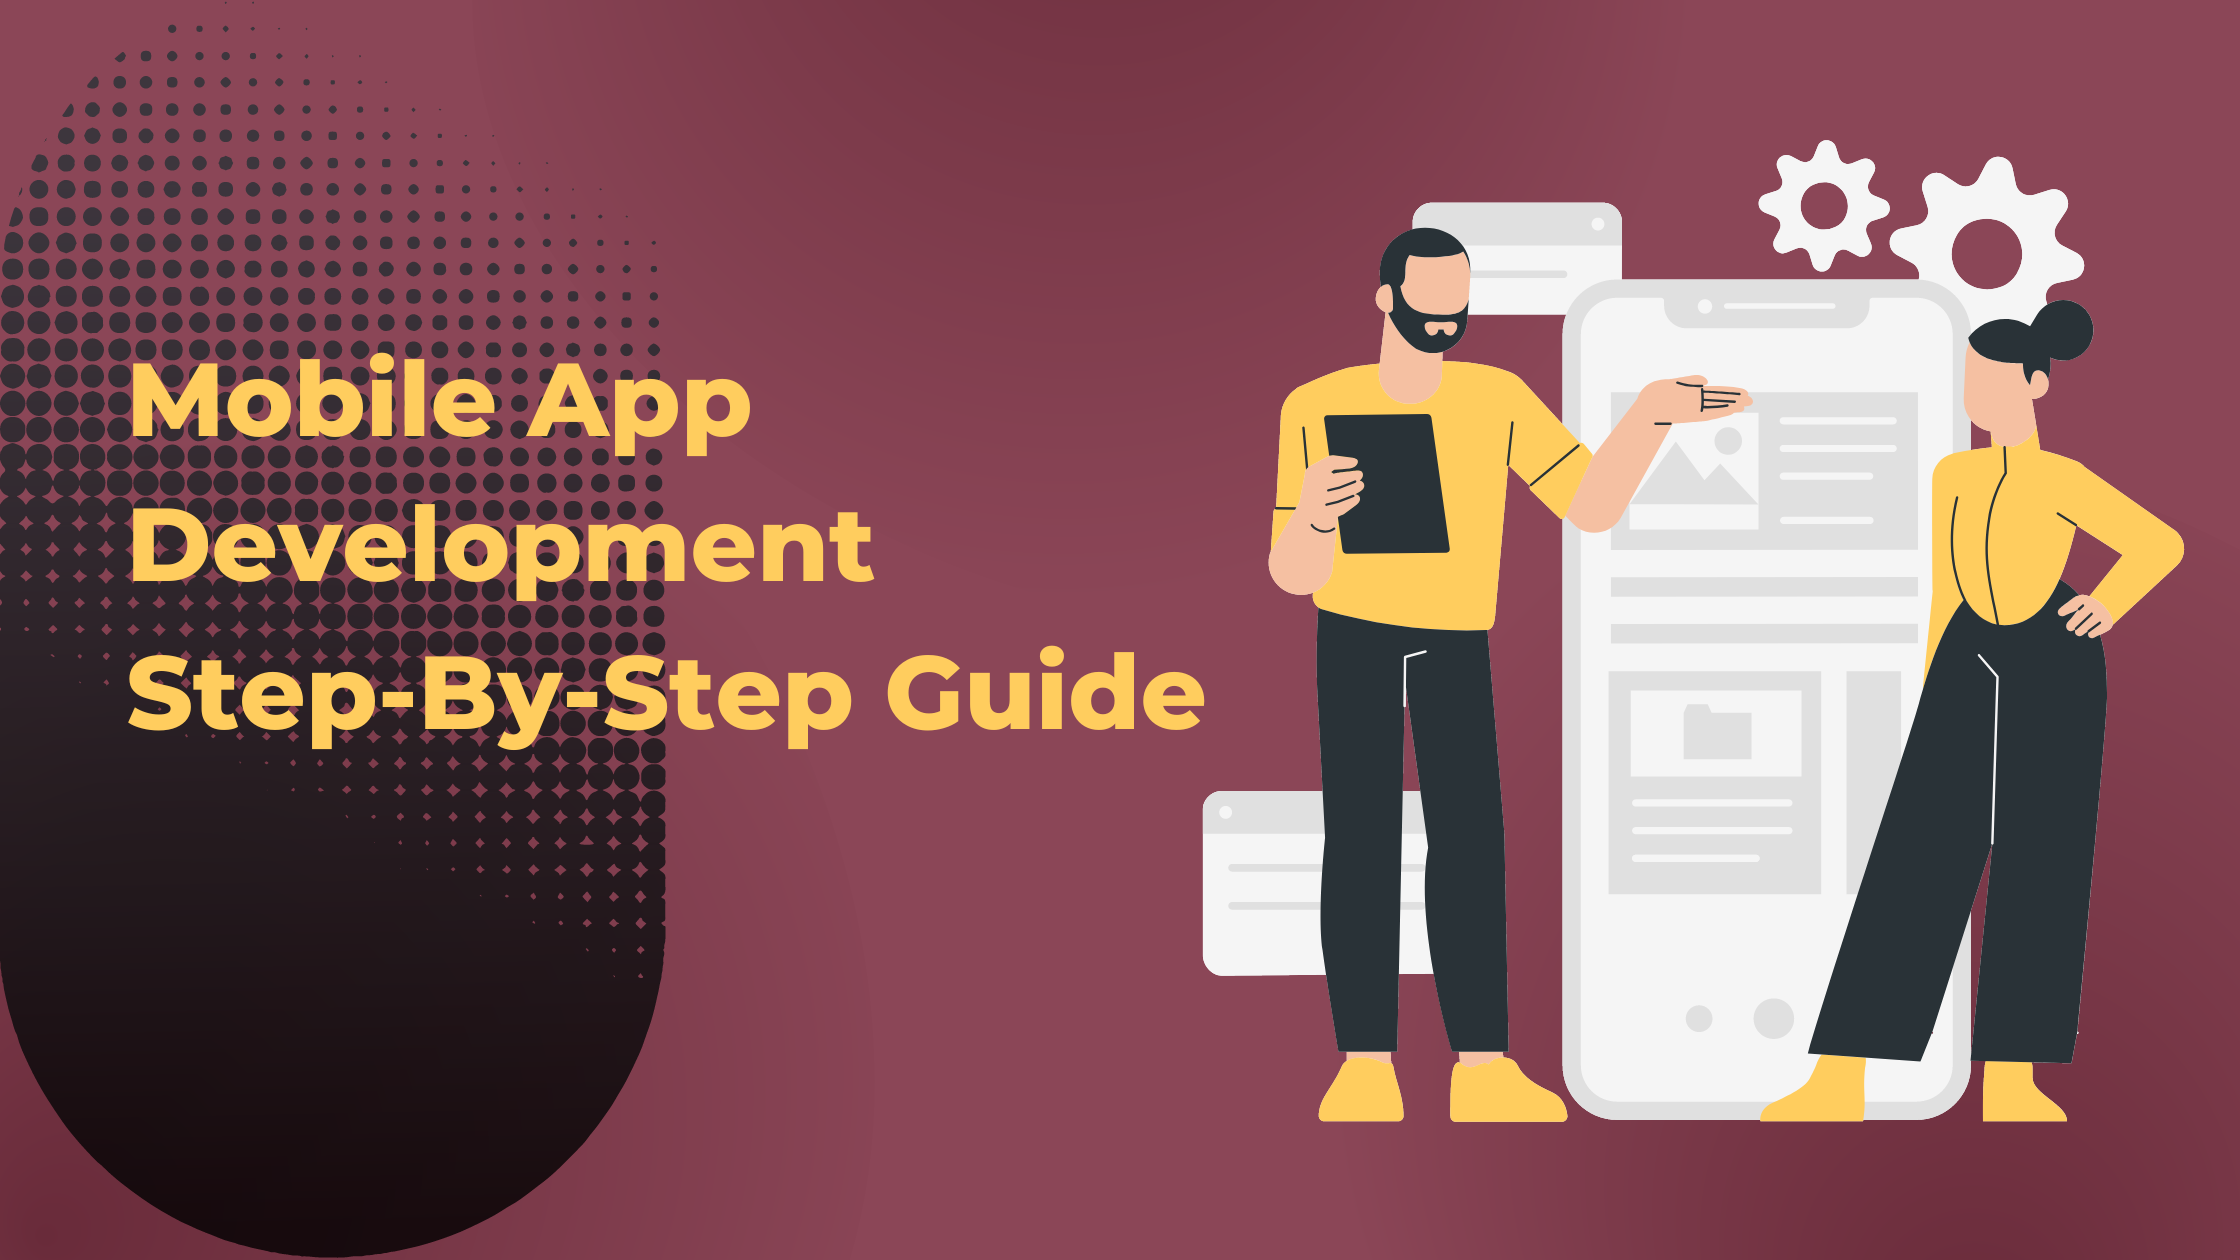 A Step-By-Step Guide To Make A Mobile App for Transportation and Logistics Business